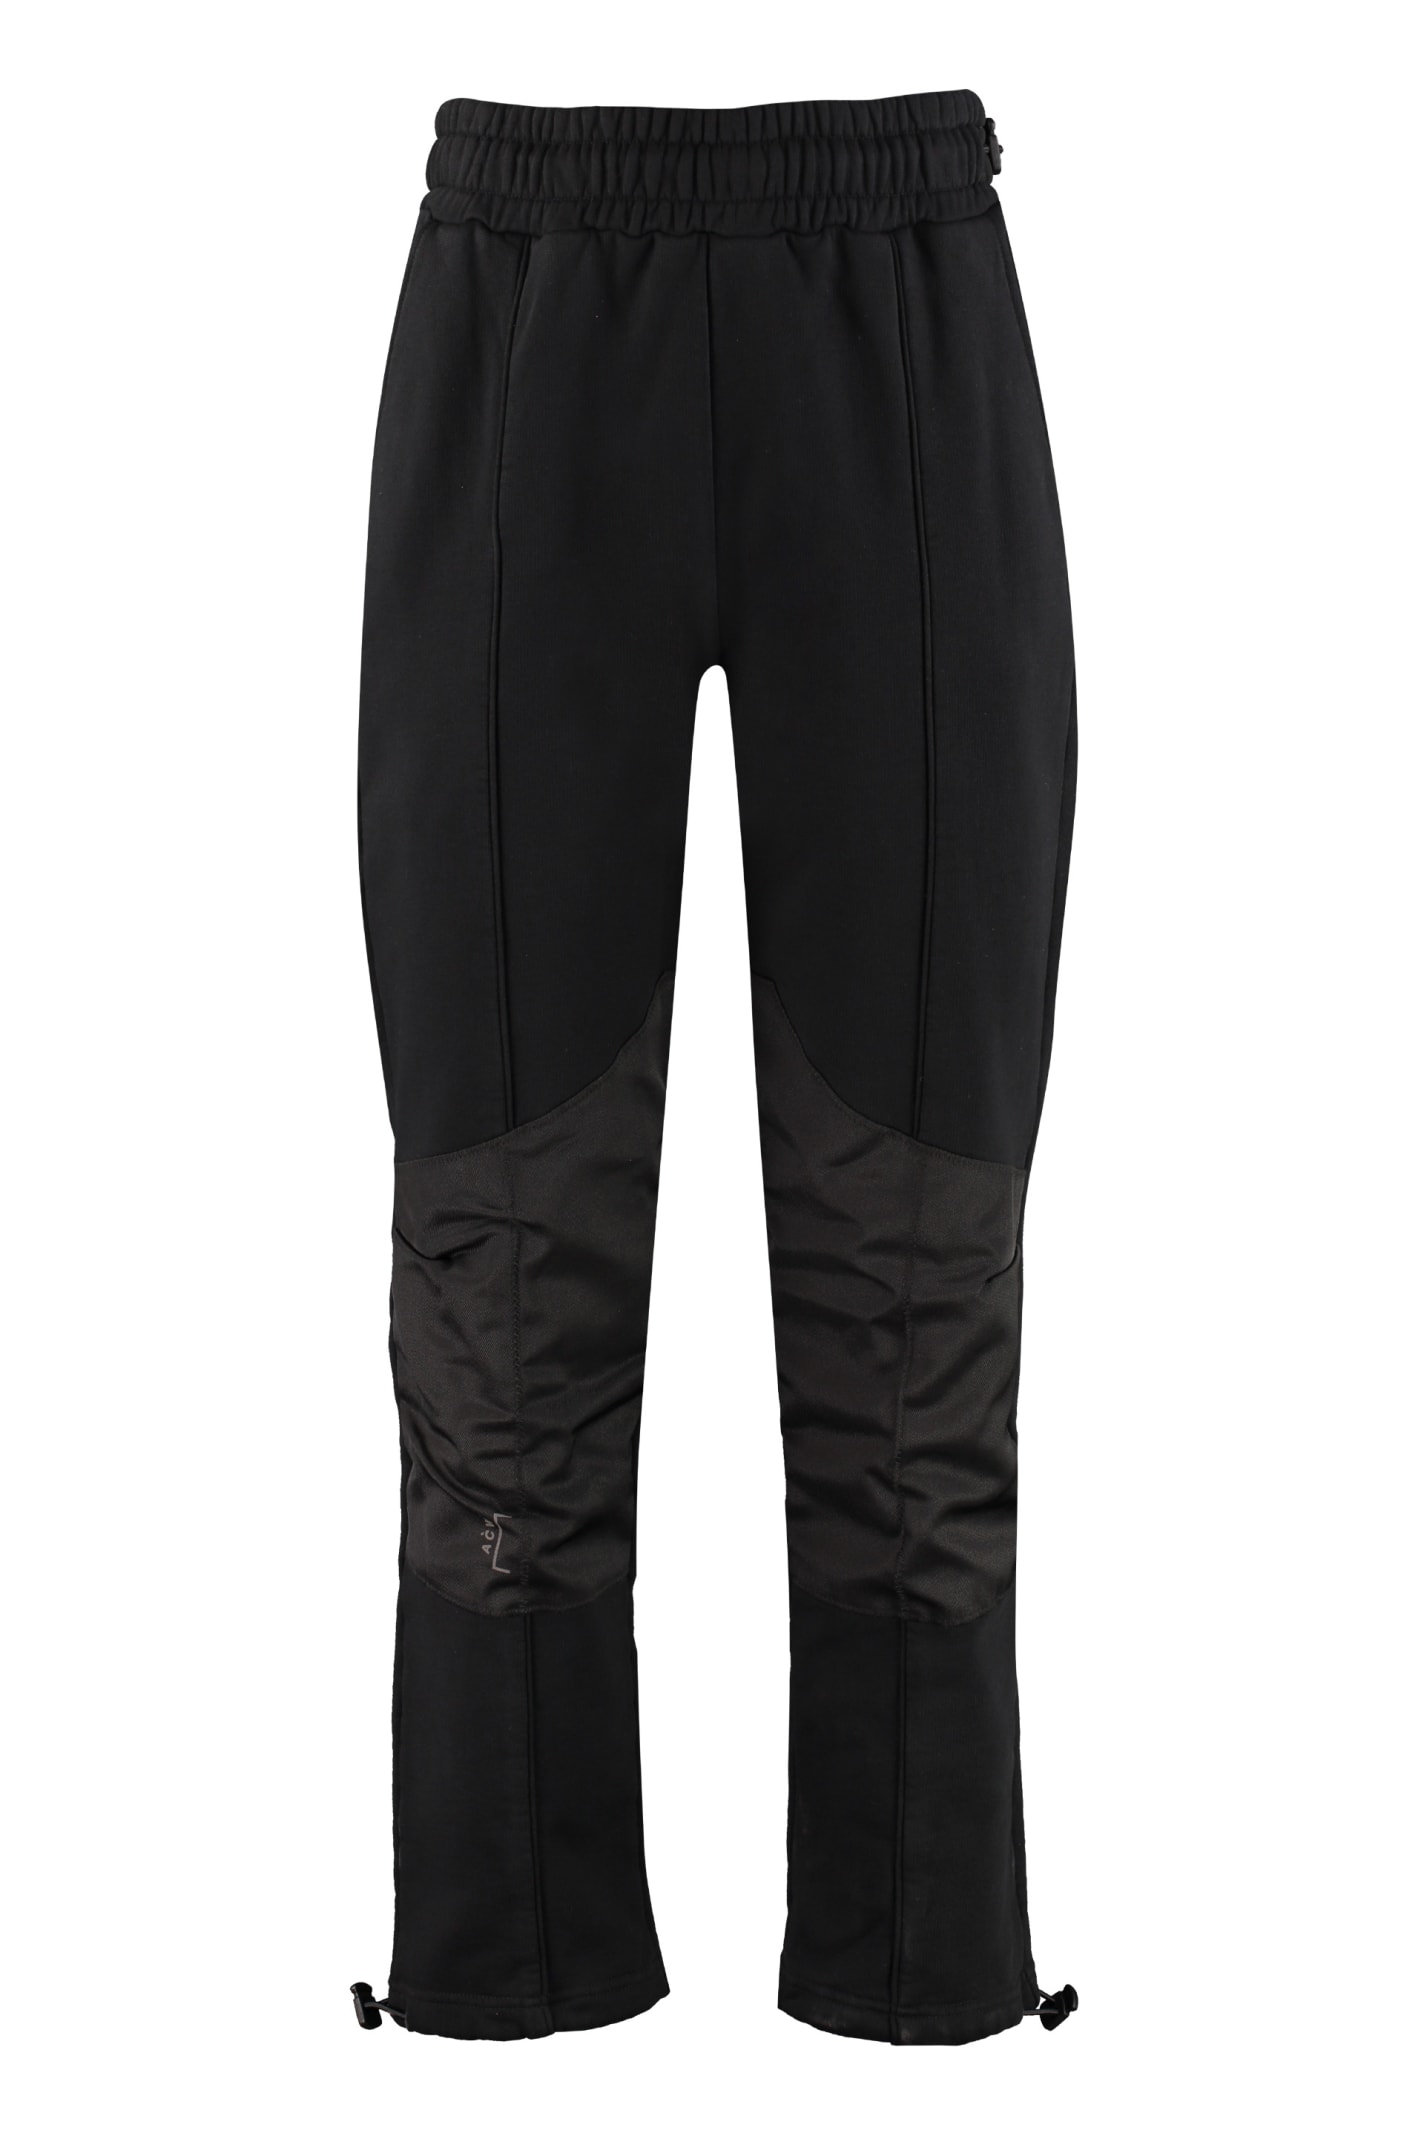 A-cold-wall* Stretch Cotton Track-pants In Black